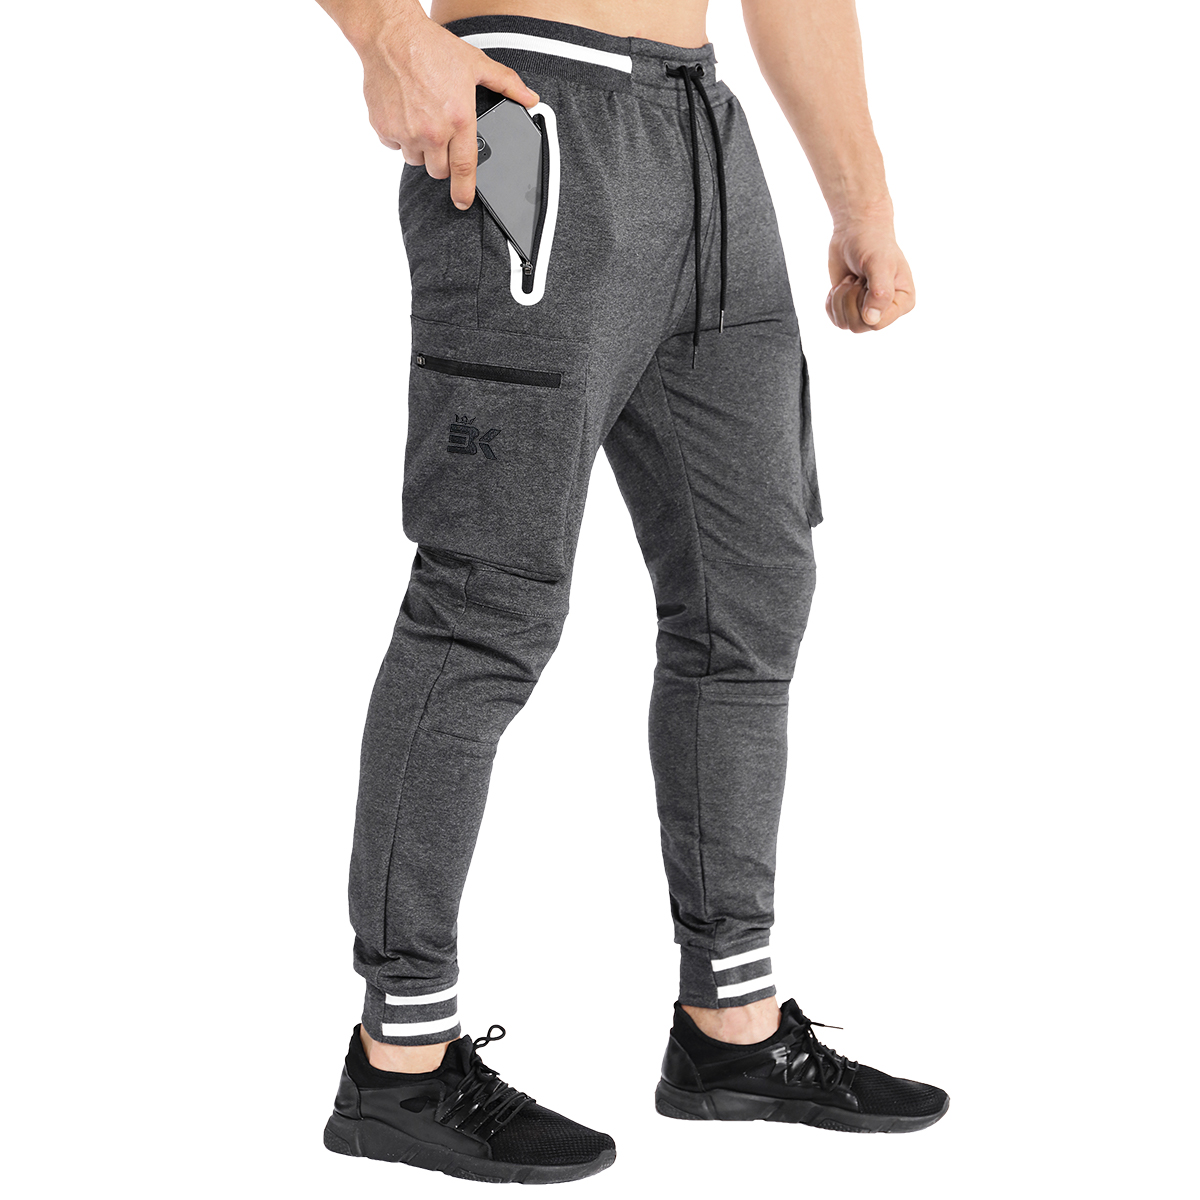 BROKIG Mens Tapered Workout Sweatpants-Casual Gym Jogger Pants Cargo ...